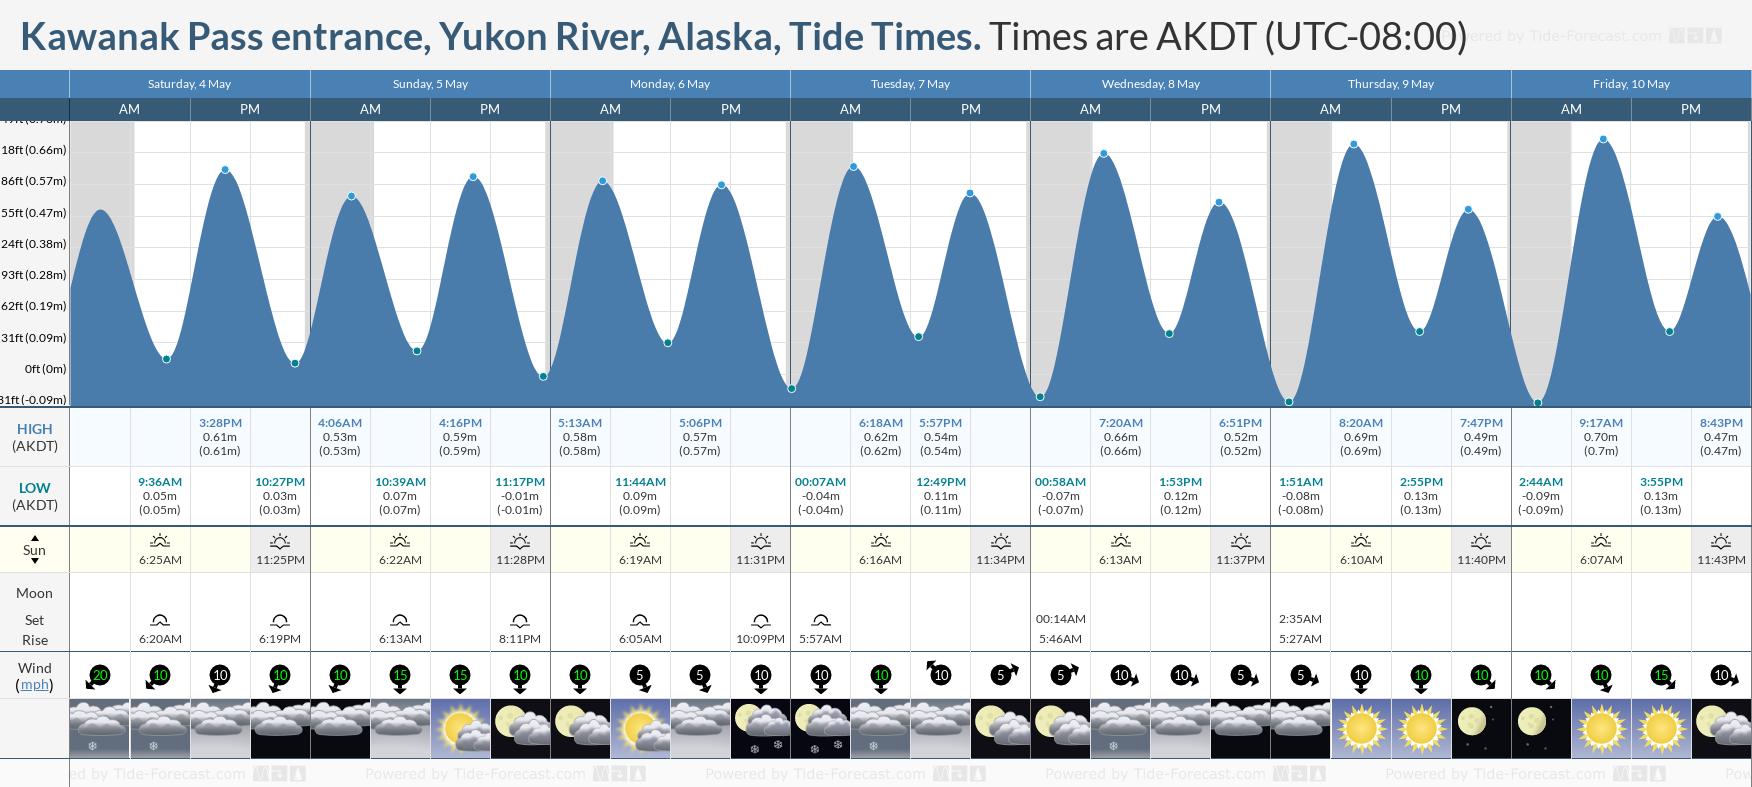 Kawanak Pass entrance, Yukon River, Alaska Tide Chart including high and low tide tide times for the next 7 days